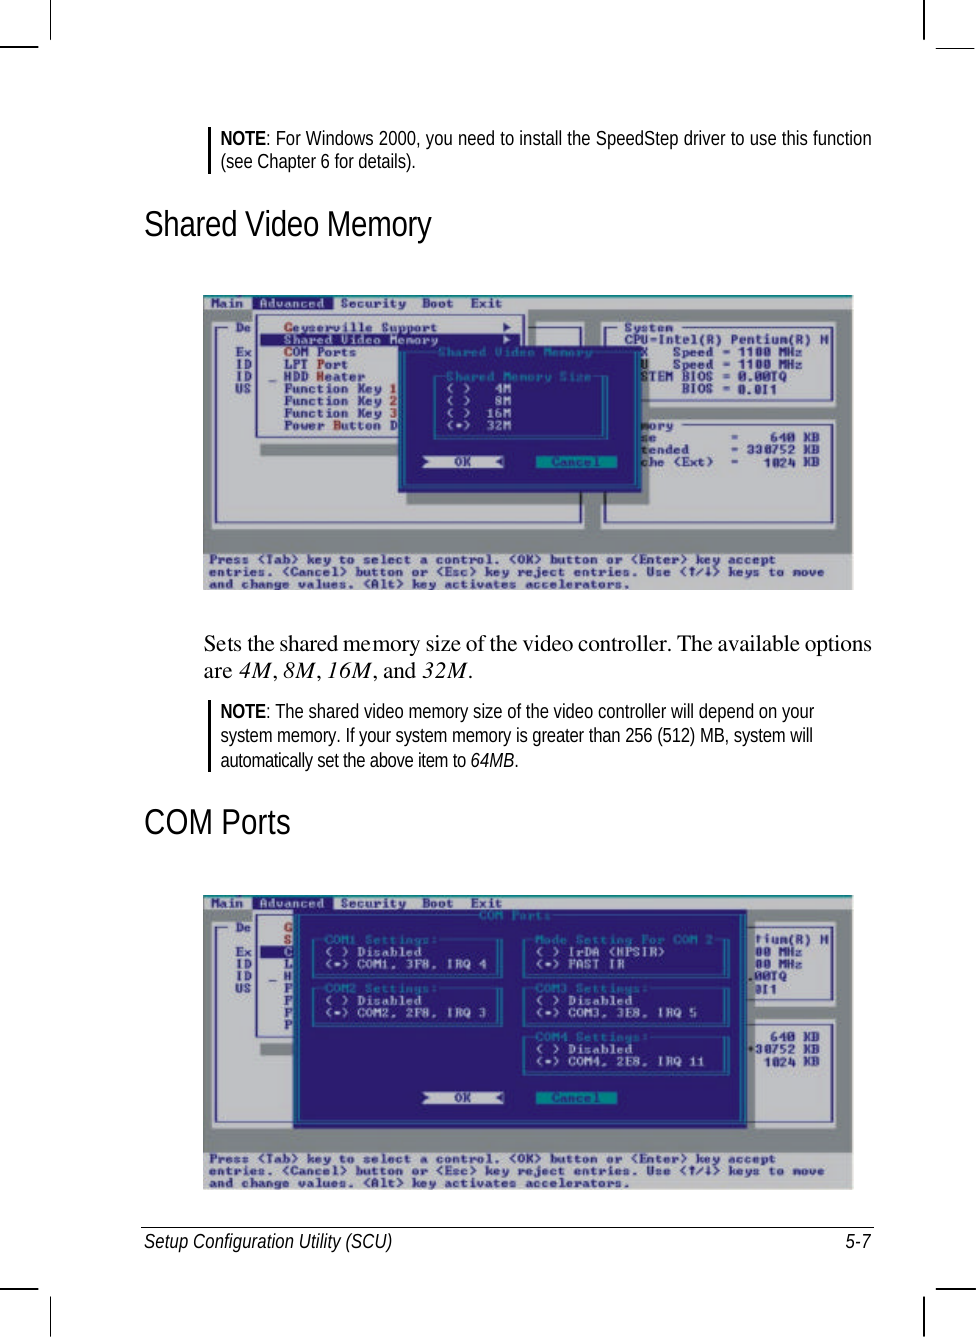  Setup Configuration Utility (SCU) 5-7 NOTE: For Windows 2000, you need to install the SpeedStep driver to use this function (see Chapter 6 for details). Shared Video Memory  Sets the shared memory size of the video controller. The available options are 4M, 8M, 16M, and 32M. NOTE: The shared video memory size of the video controller will depend on your system memory. If your system memory is greater than 256 (512) MB, system will automatically set the above item to 64MB. COM Ports  